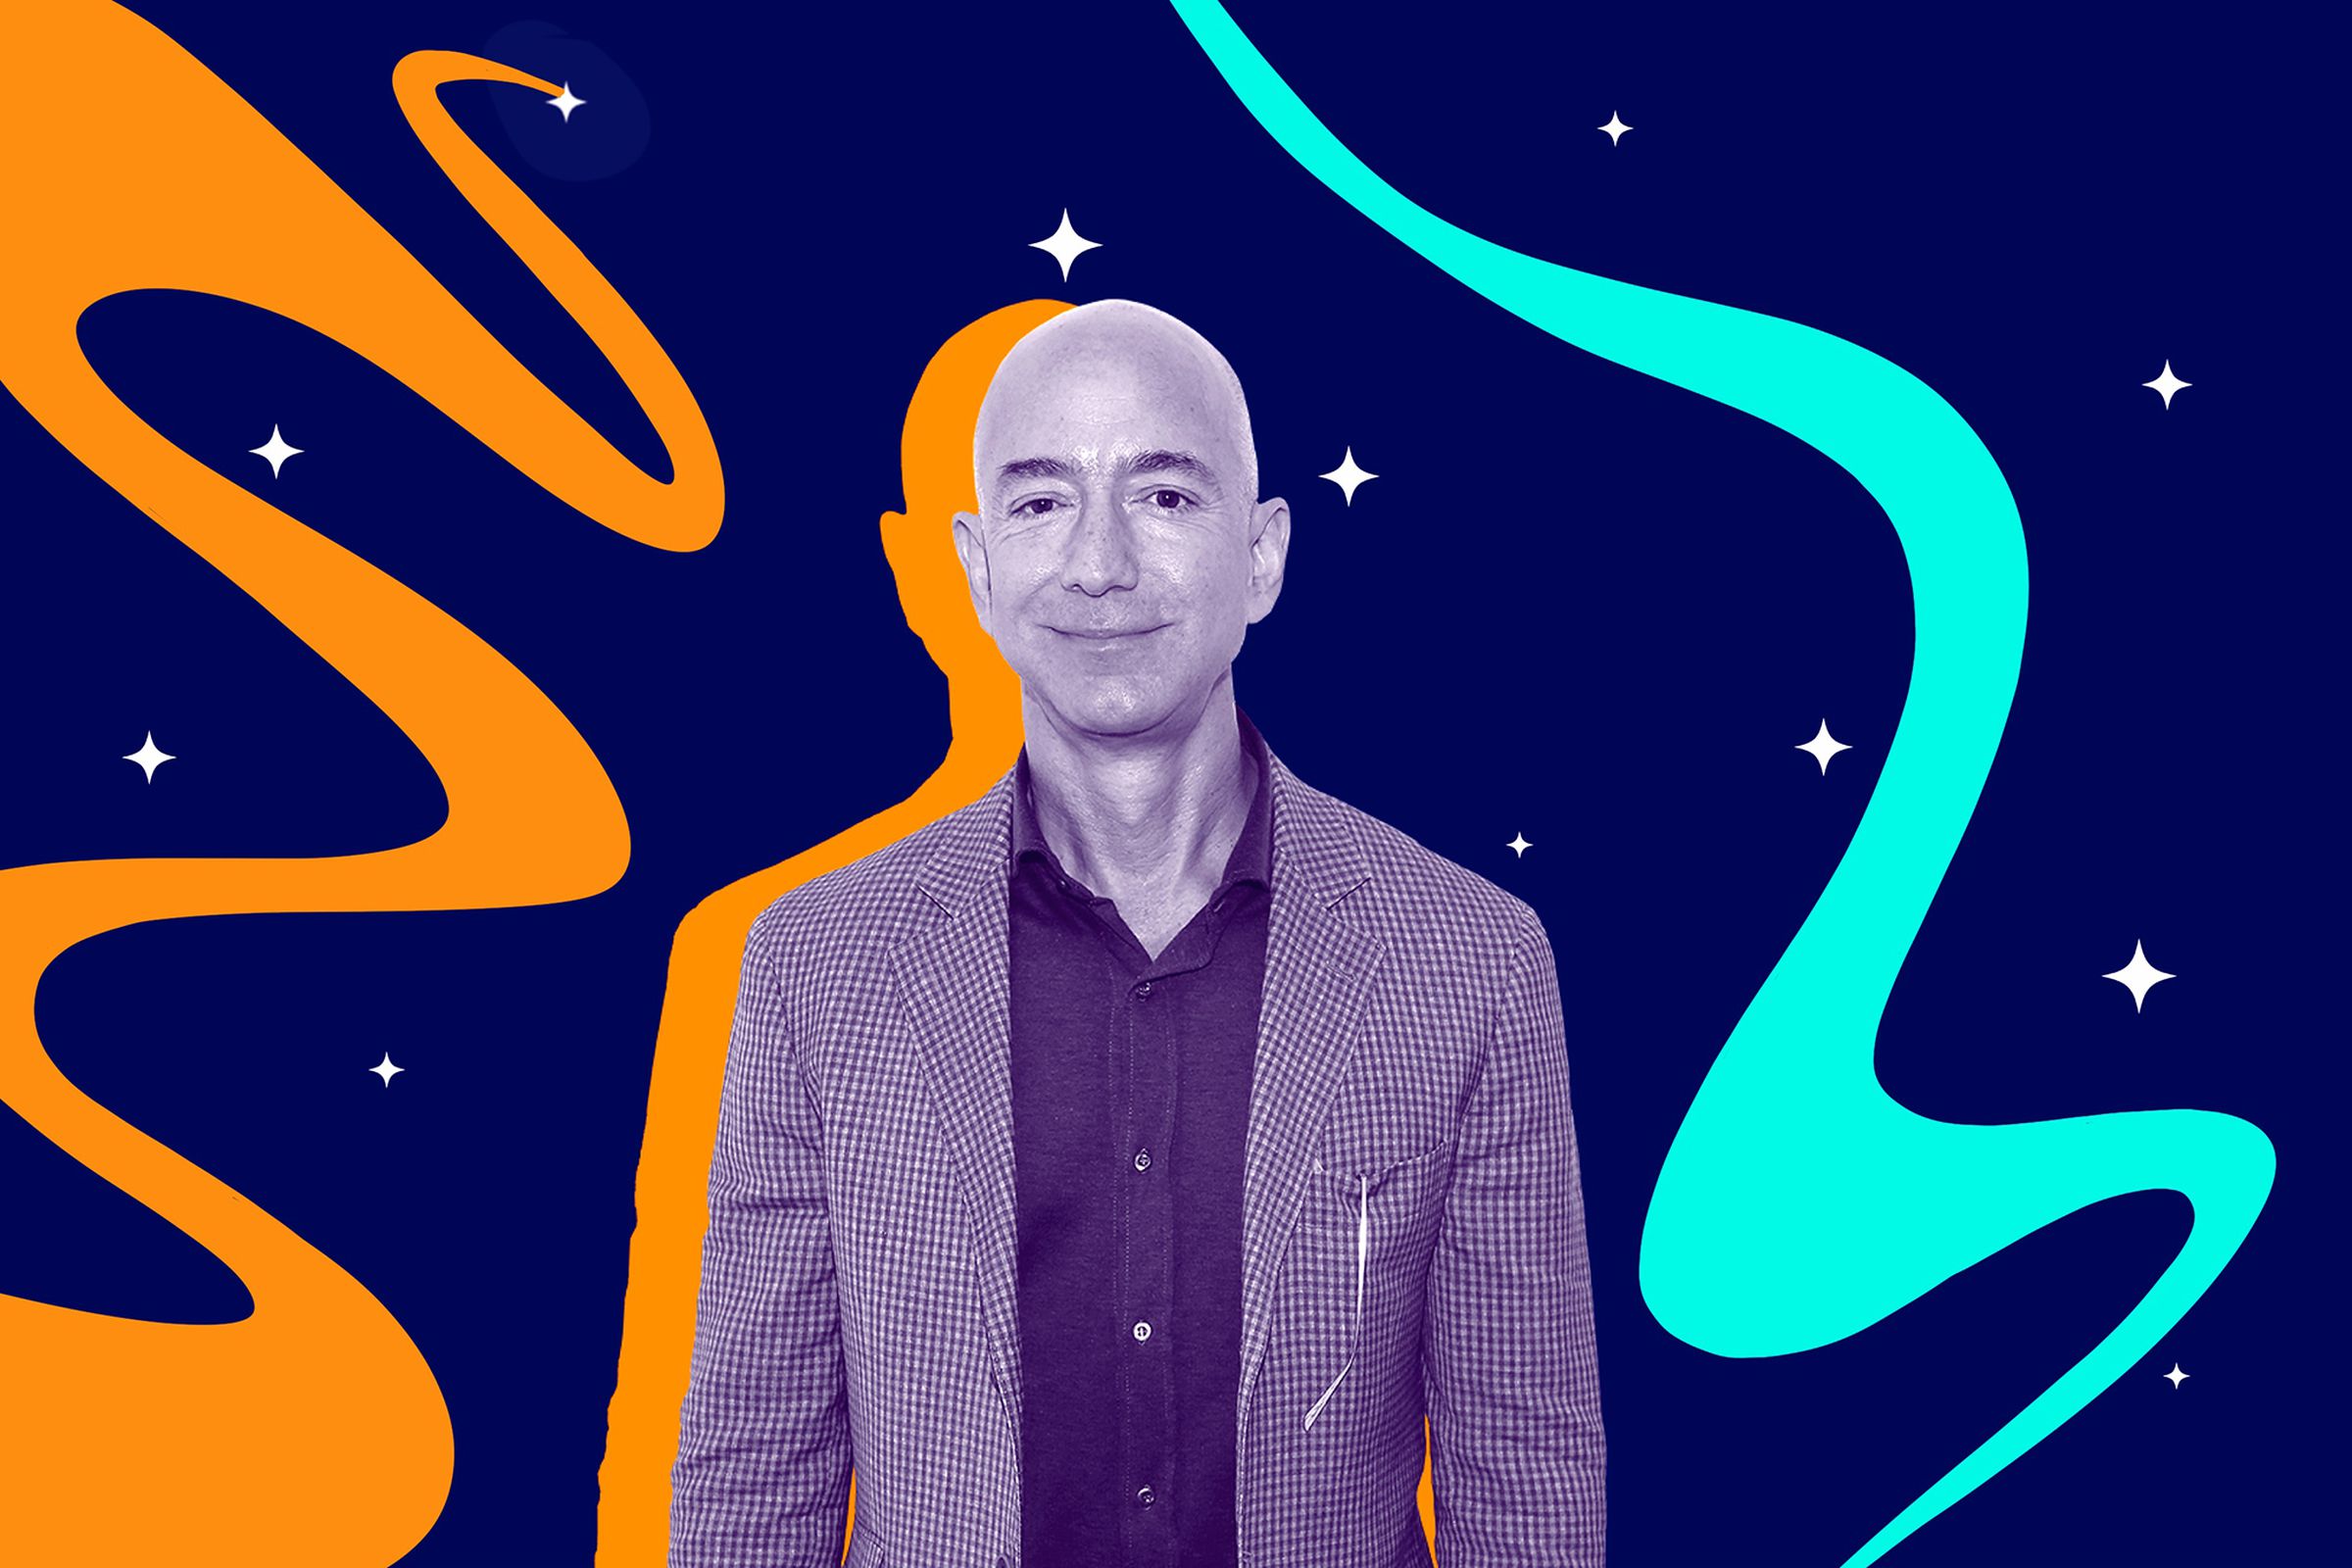 Jeff Bezos is surrounded by abstract squiggles, on a background of stars. His biceps are demurely squirreled inside a suit.